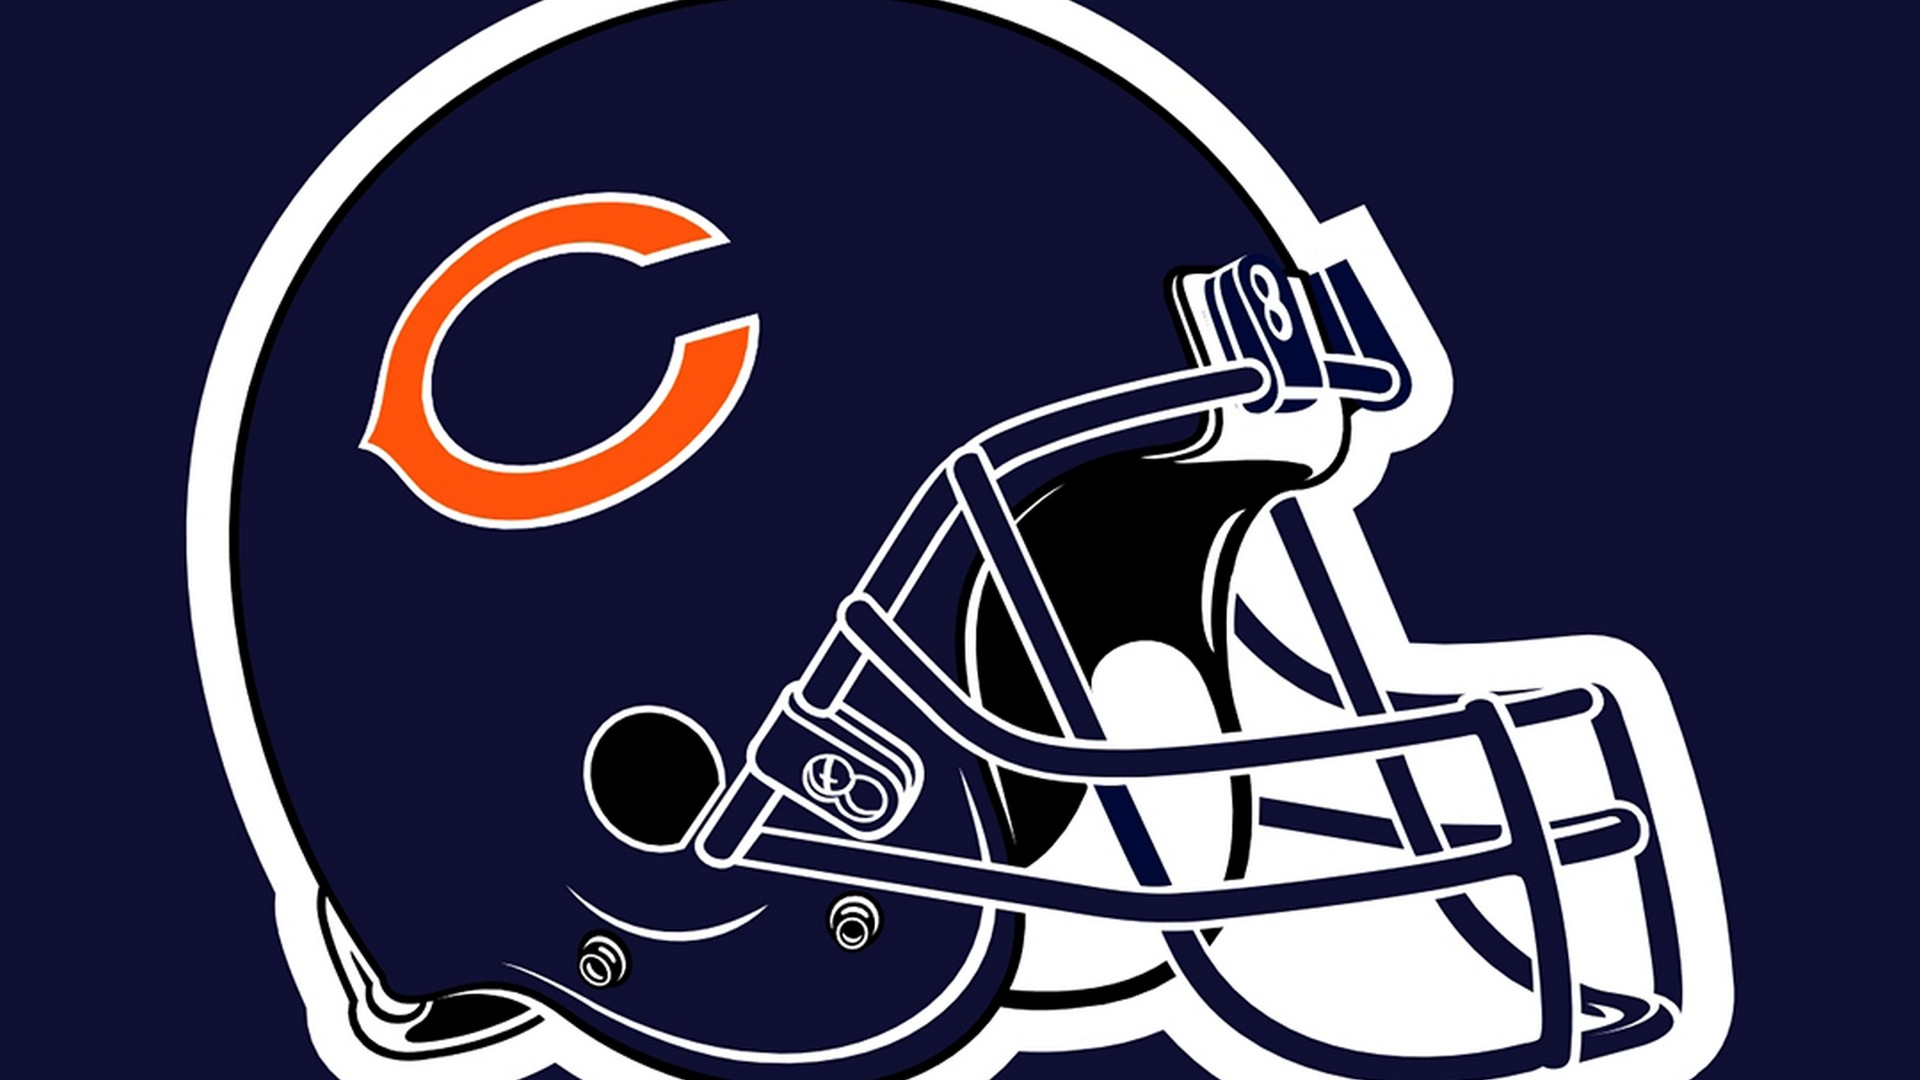 Chicago Bears NFL For PC Wallpaper With high-resolution 1920X1080 pixel. You can use this wallpaper for your Mac or Windows Desktop Background, iPhone, Android or Tablet and another Smartphone device